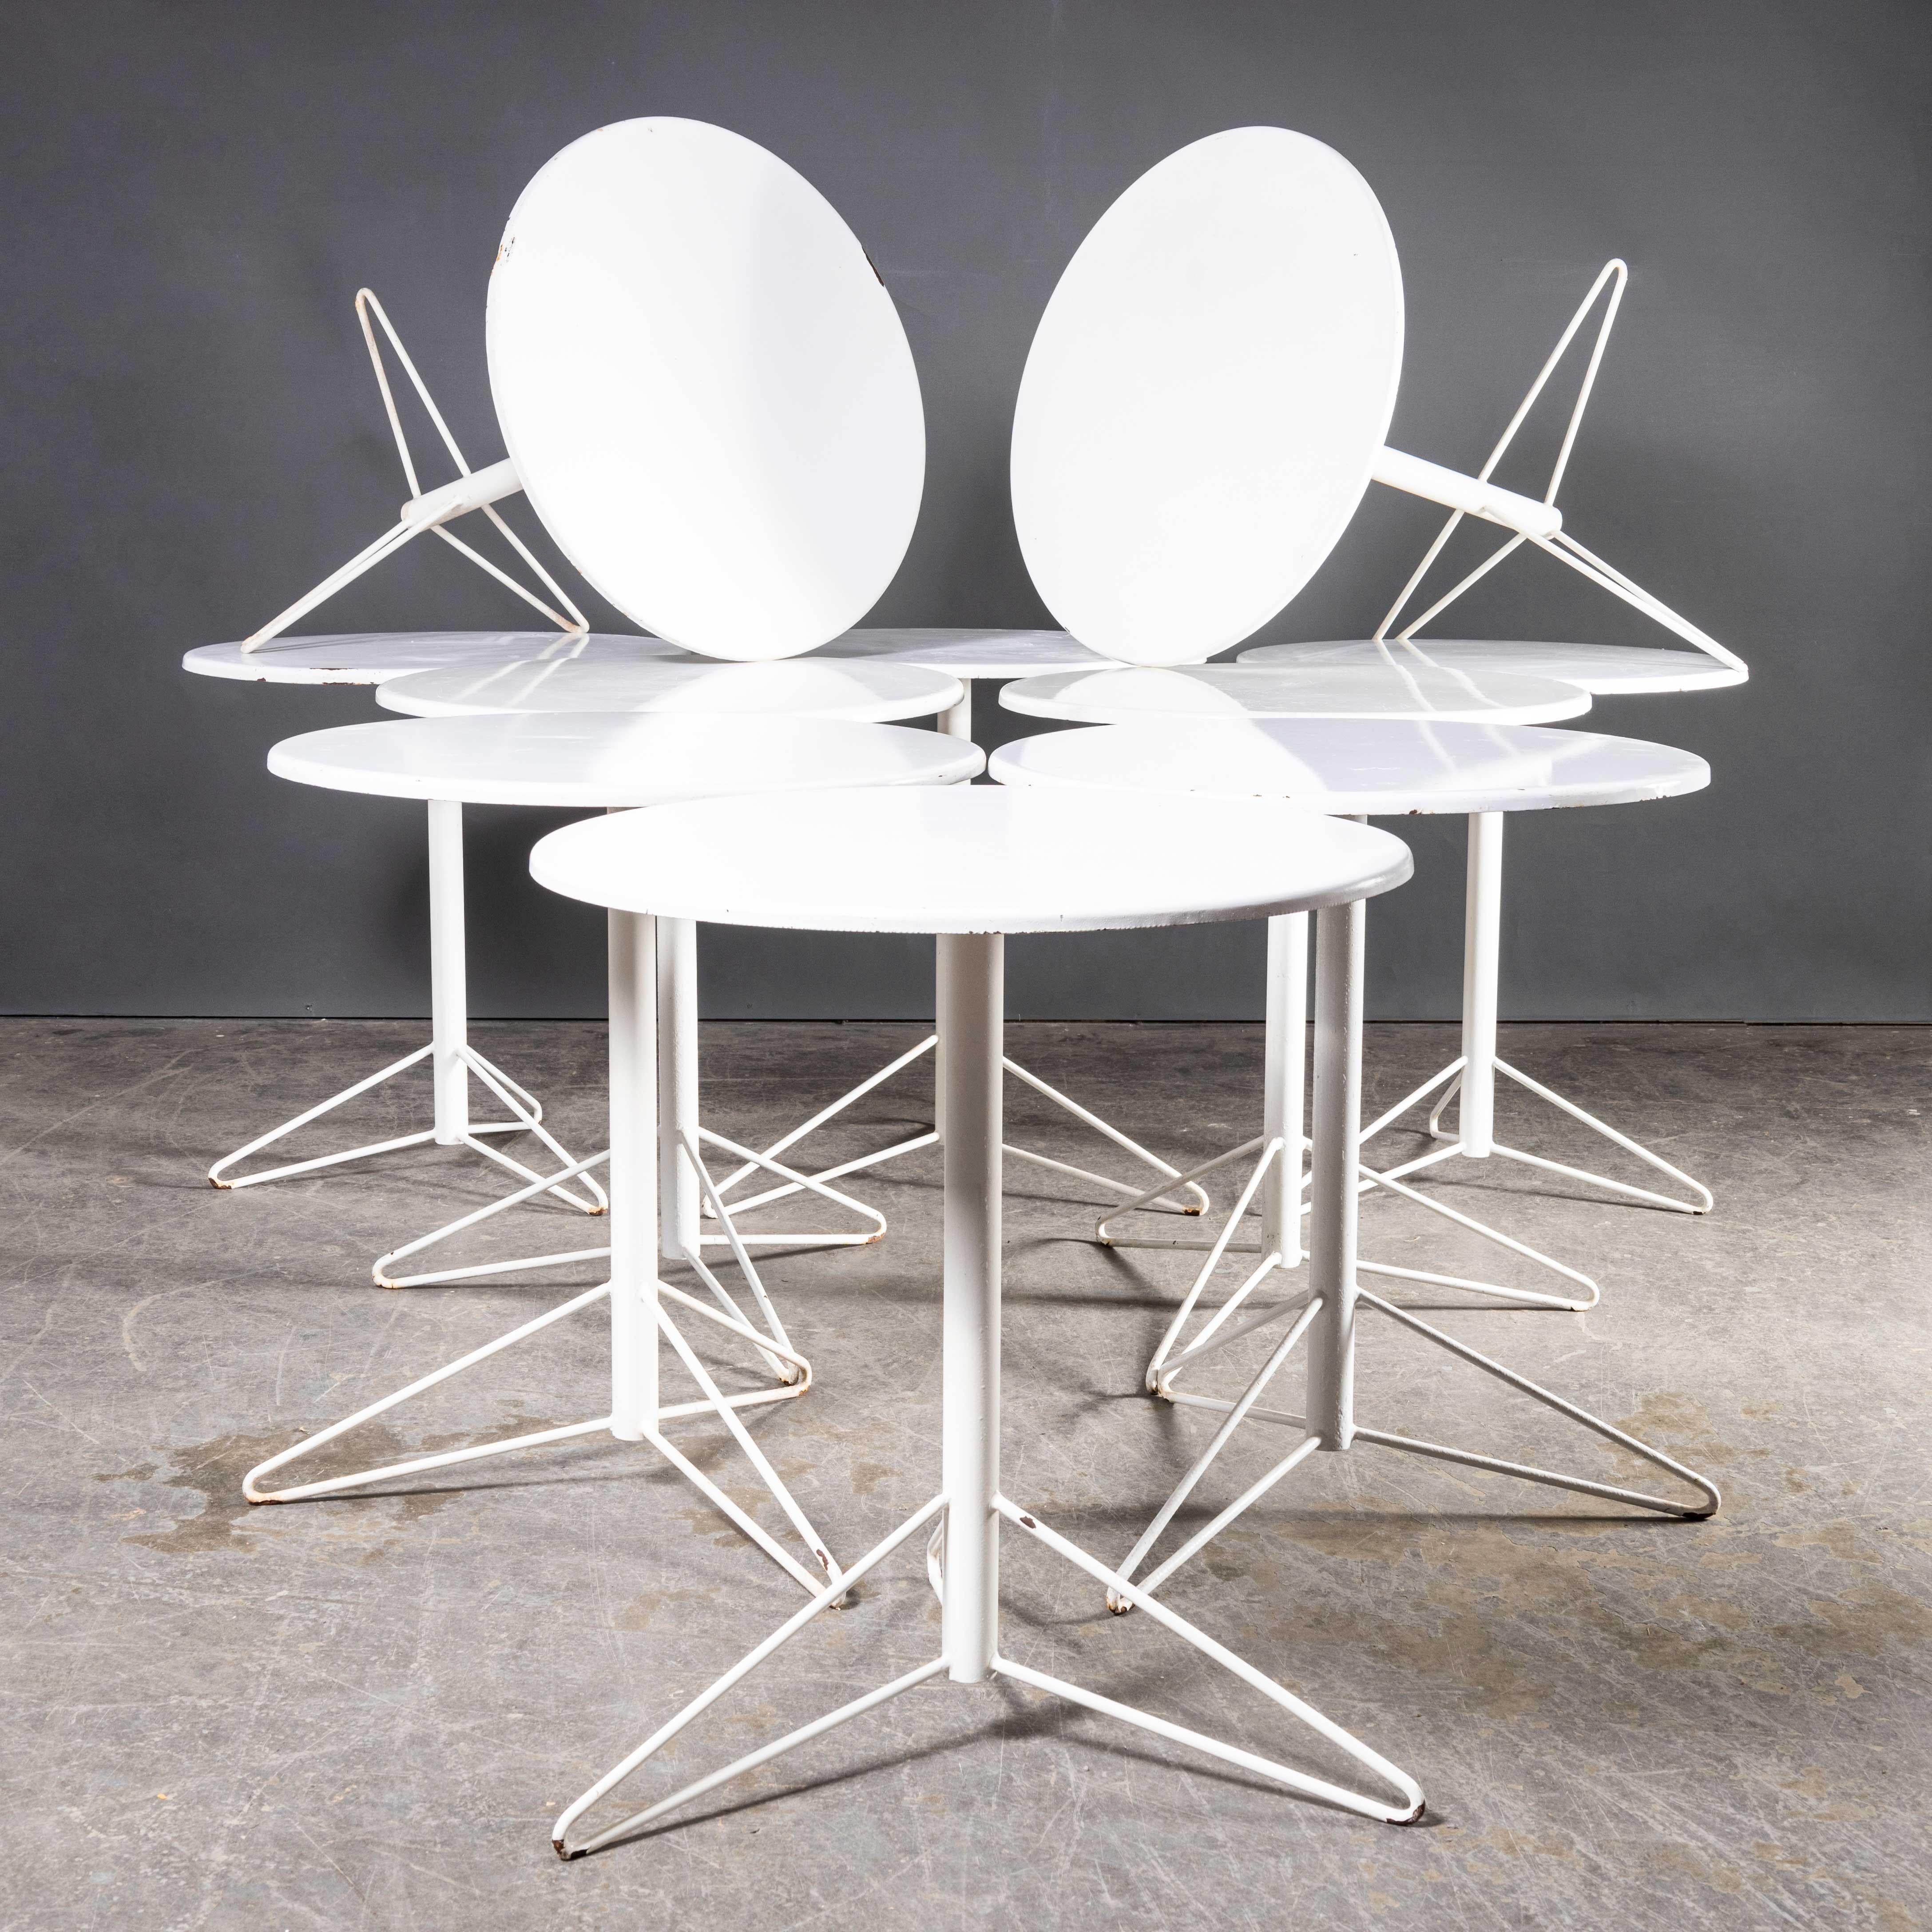 French 1970’s Egon Eiremann House in Baden Baden White Metal Tables For Sale